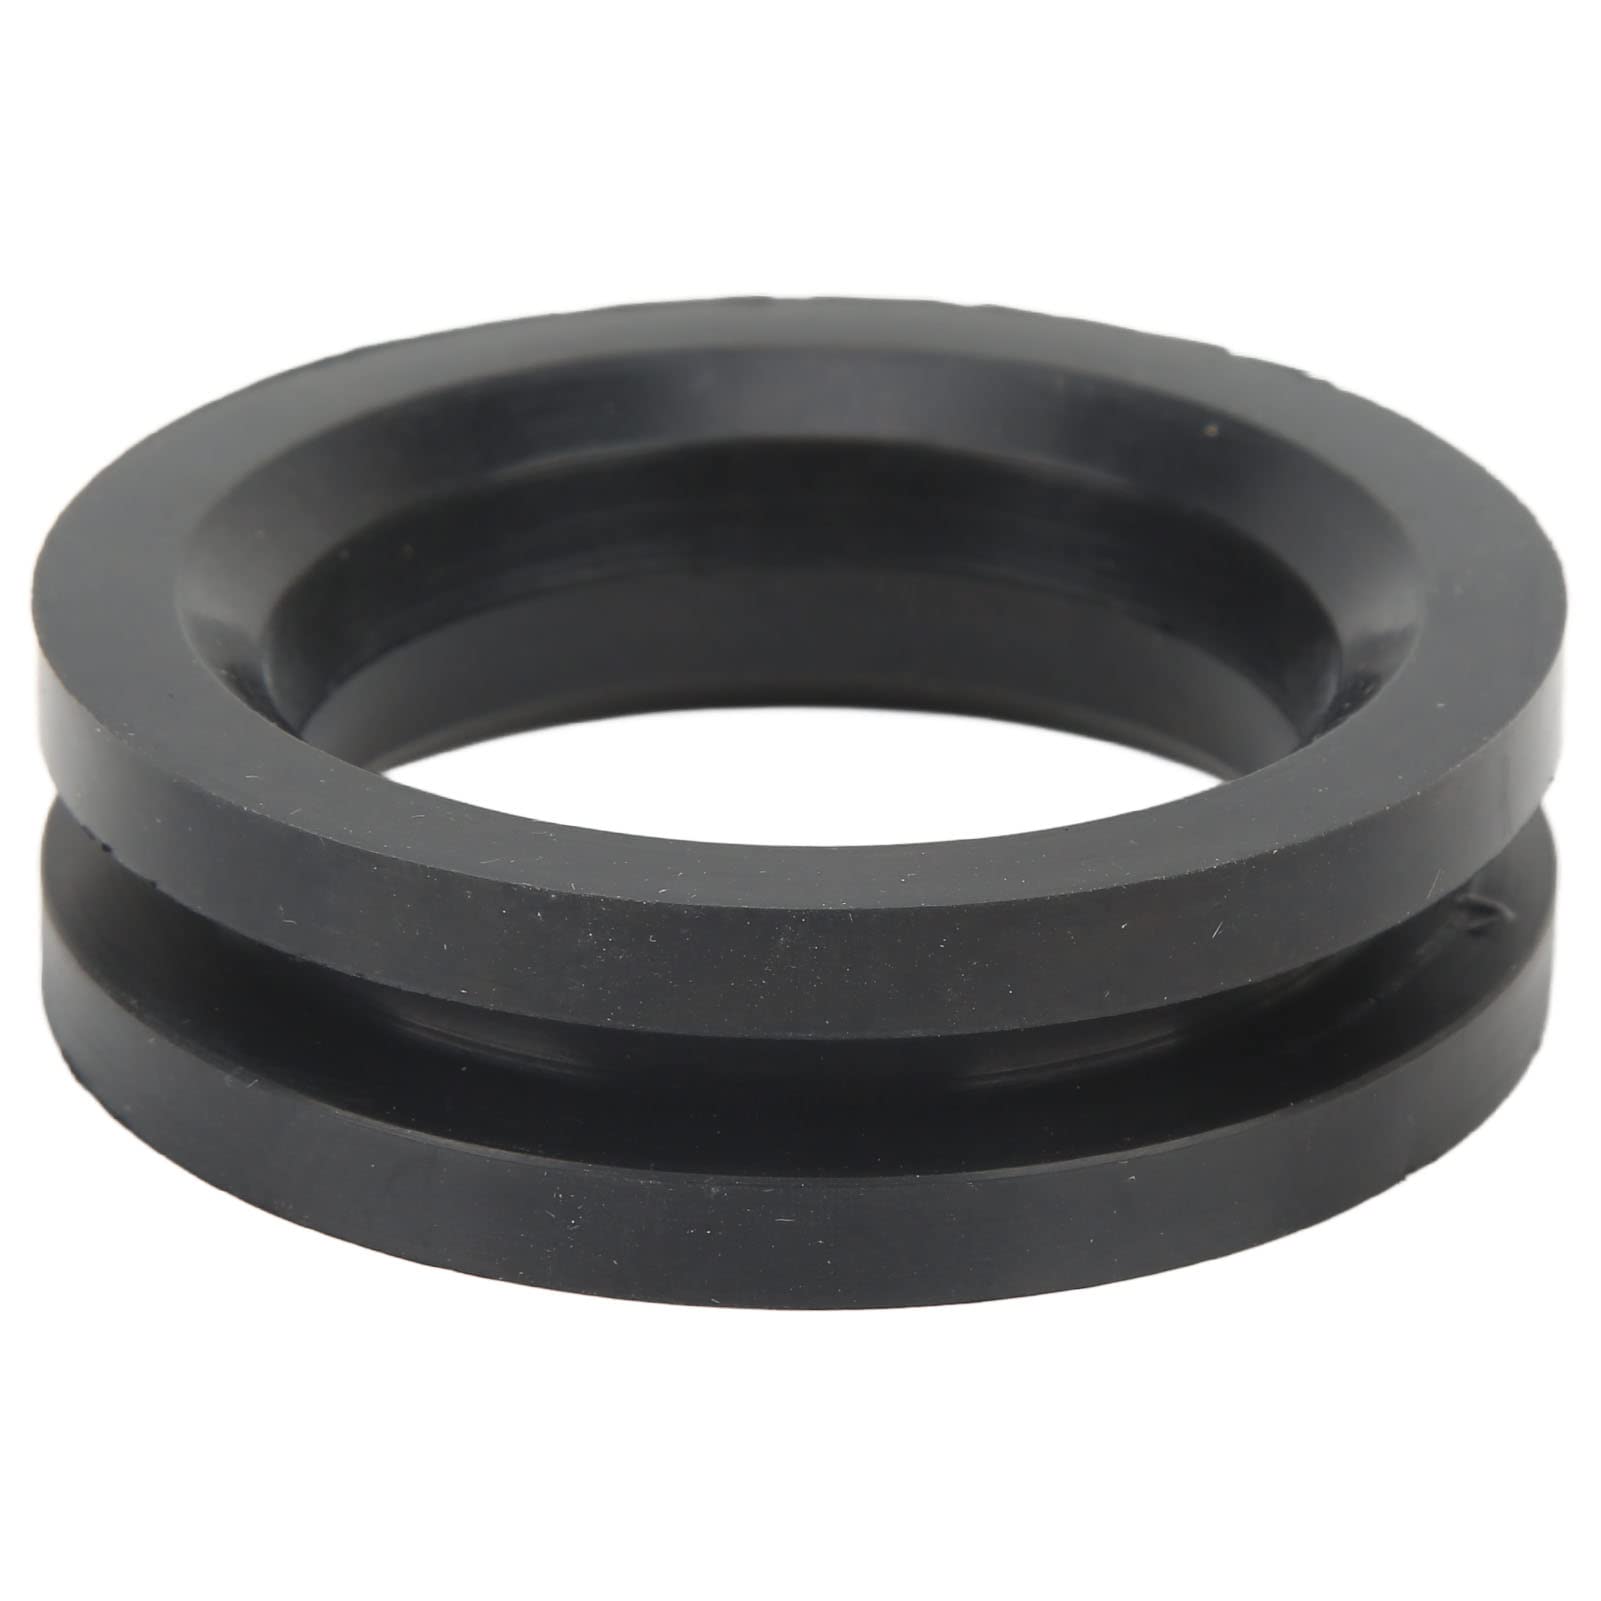 Fuel Filler Neck Seal, Fuel Tank Neck Grommet Seal Rubber Black Stable Performance 2880481 Gas Filler Tube Seal For A B C Body von aqxreight